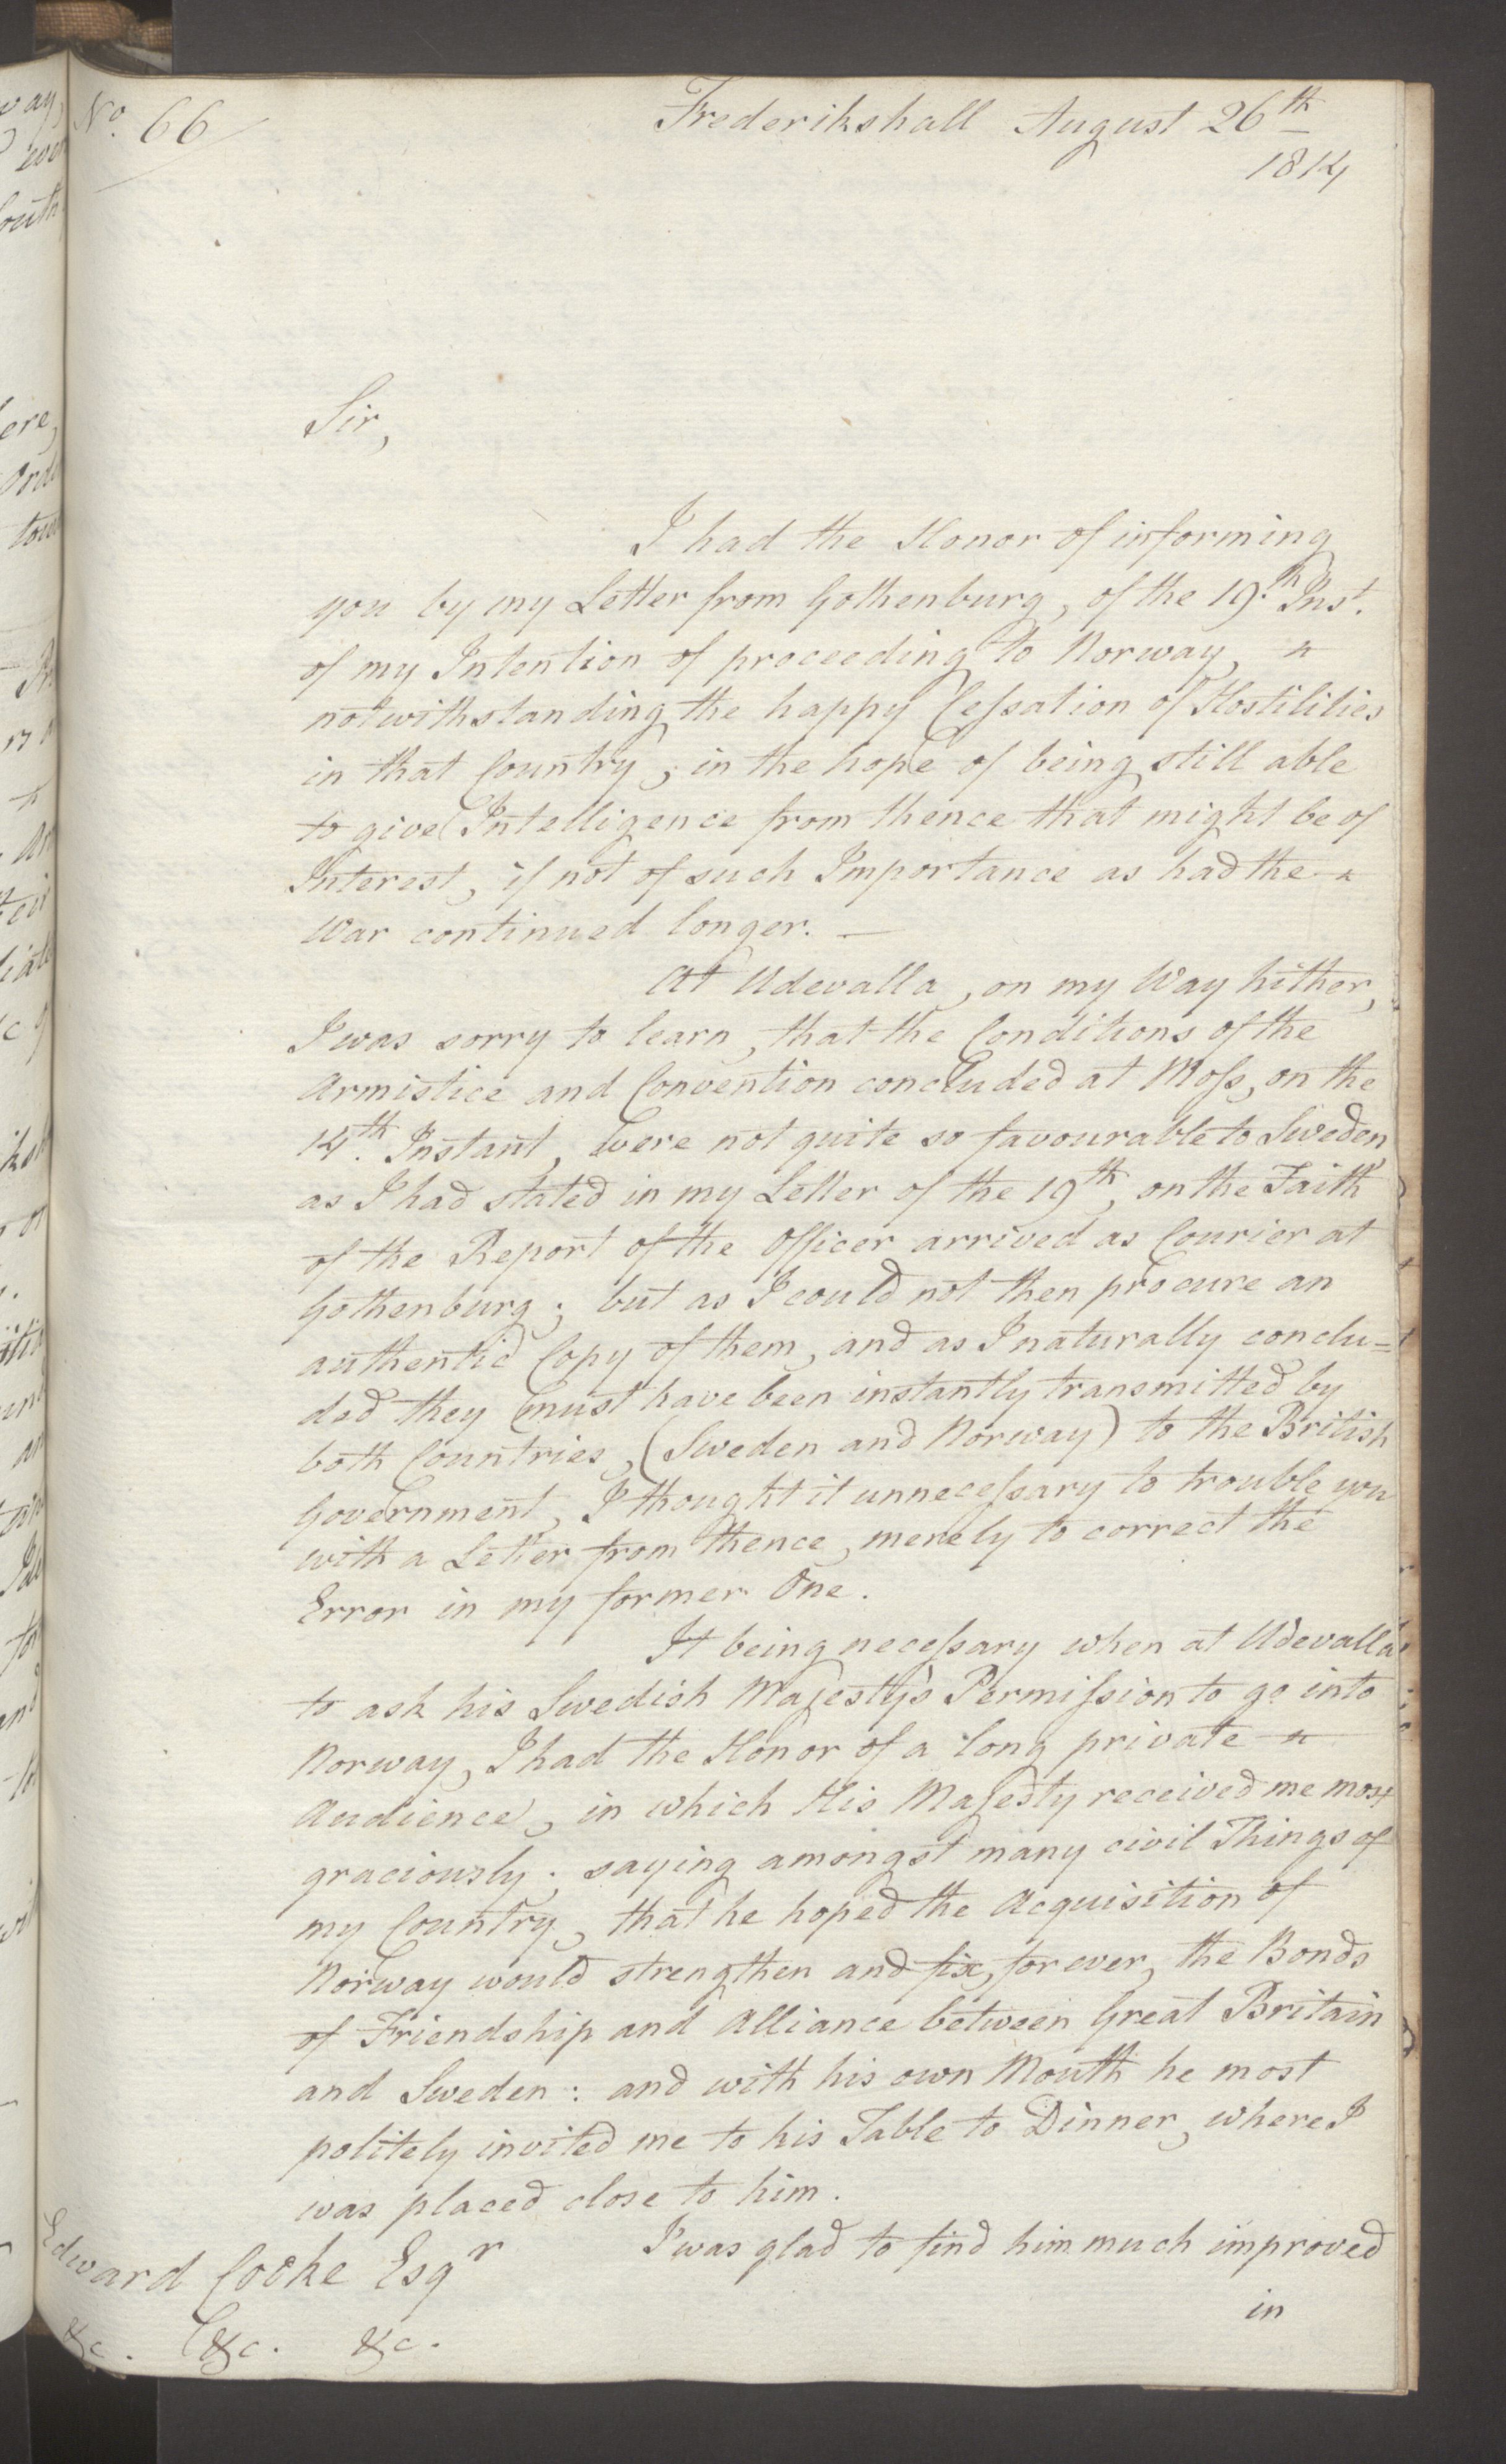 Foreign Office*, UKA/-/FO 38/16: Sir C. Gordon. Reports from Malmö, Jonkoping, and Helsingborg, 1814, p. 95